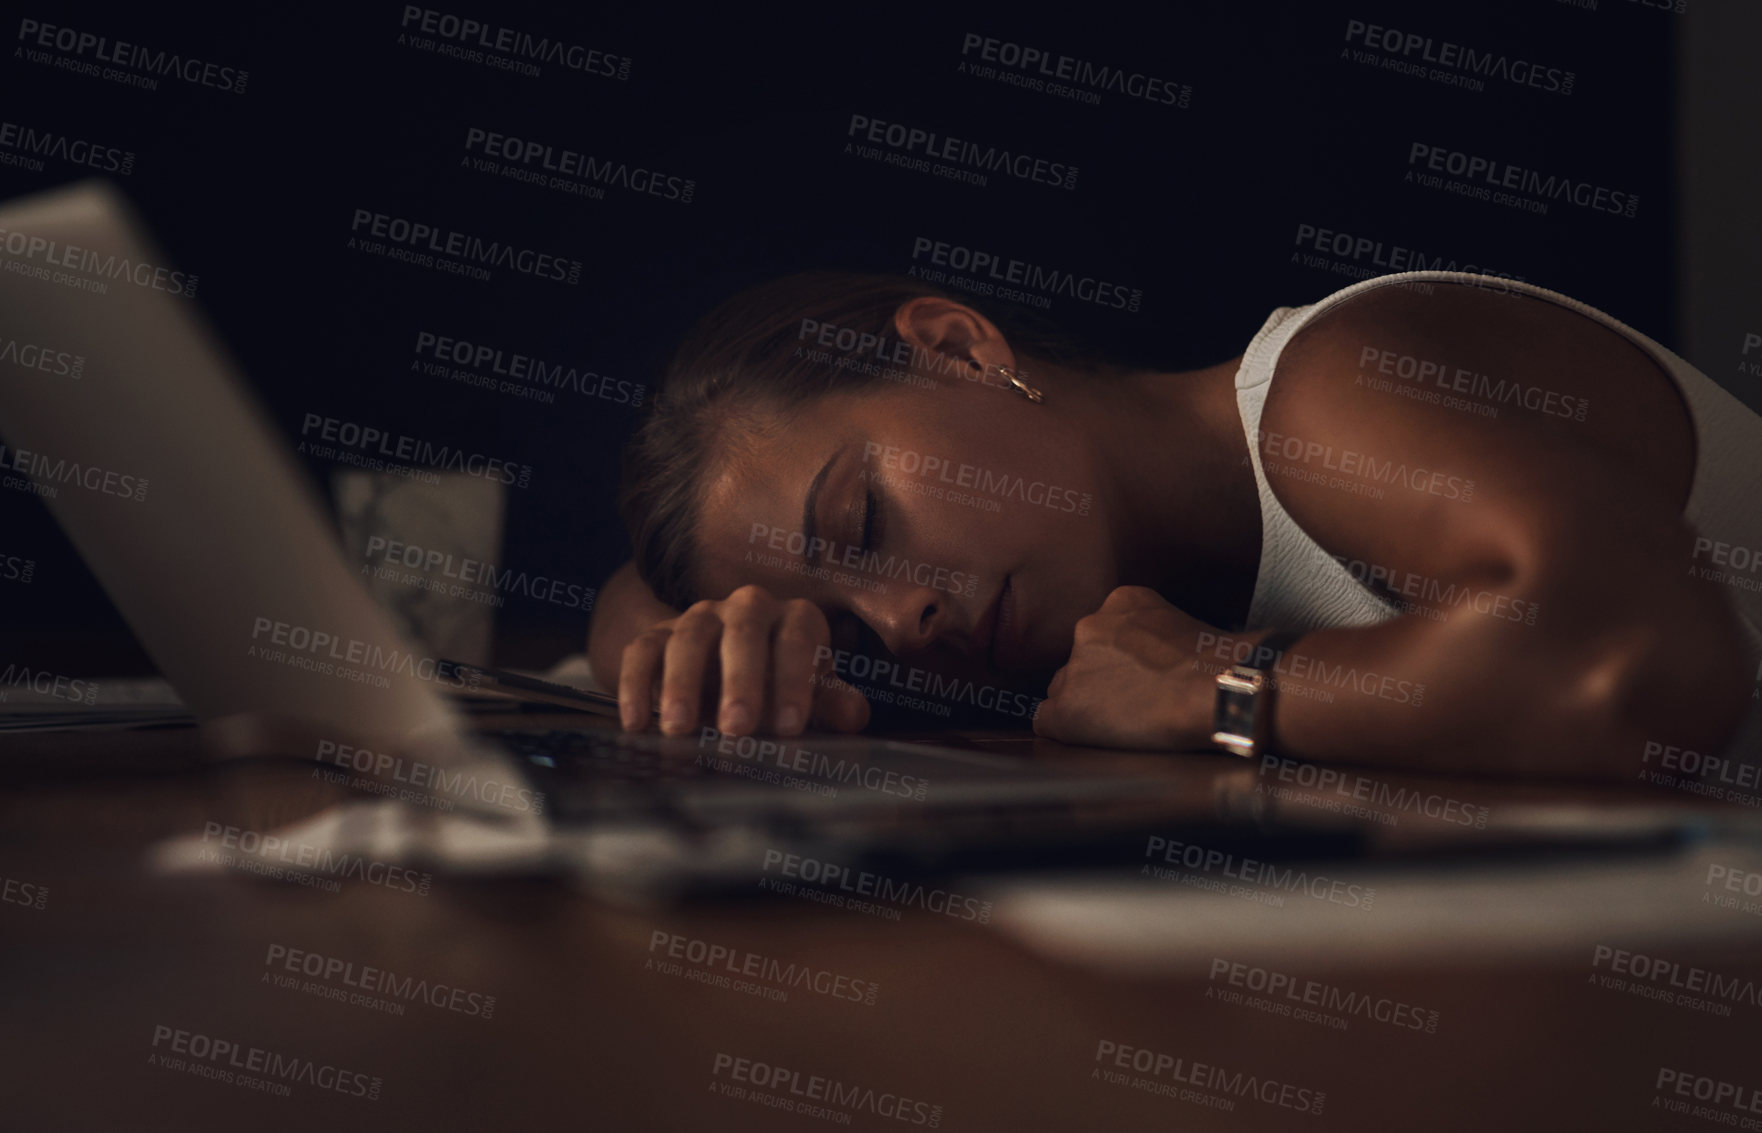 Buy stock photo Shot of a young businesswoman sleeping at her desk during a late night at work